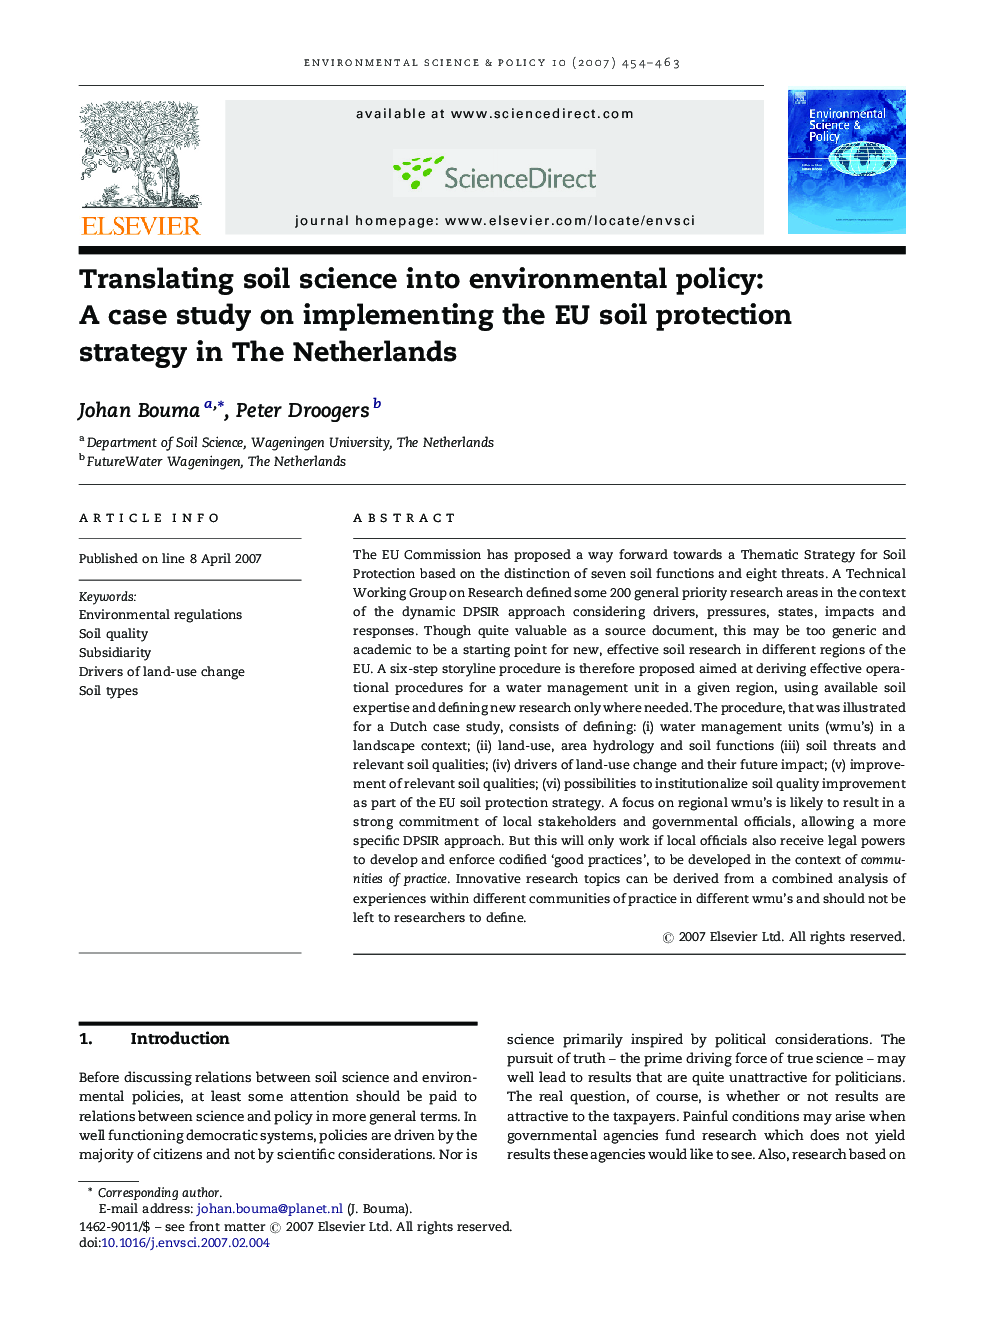 Translating soil science into environmental policy: A case study on implementing the EU soil protection strategy in The Netherlands